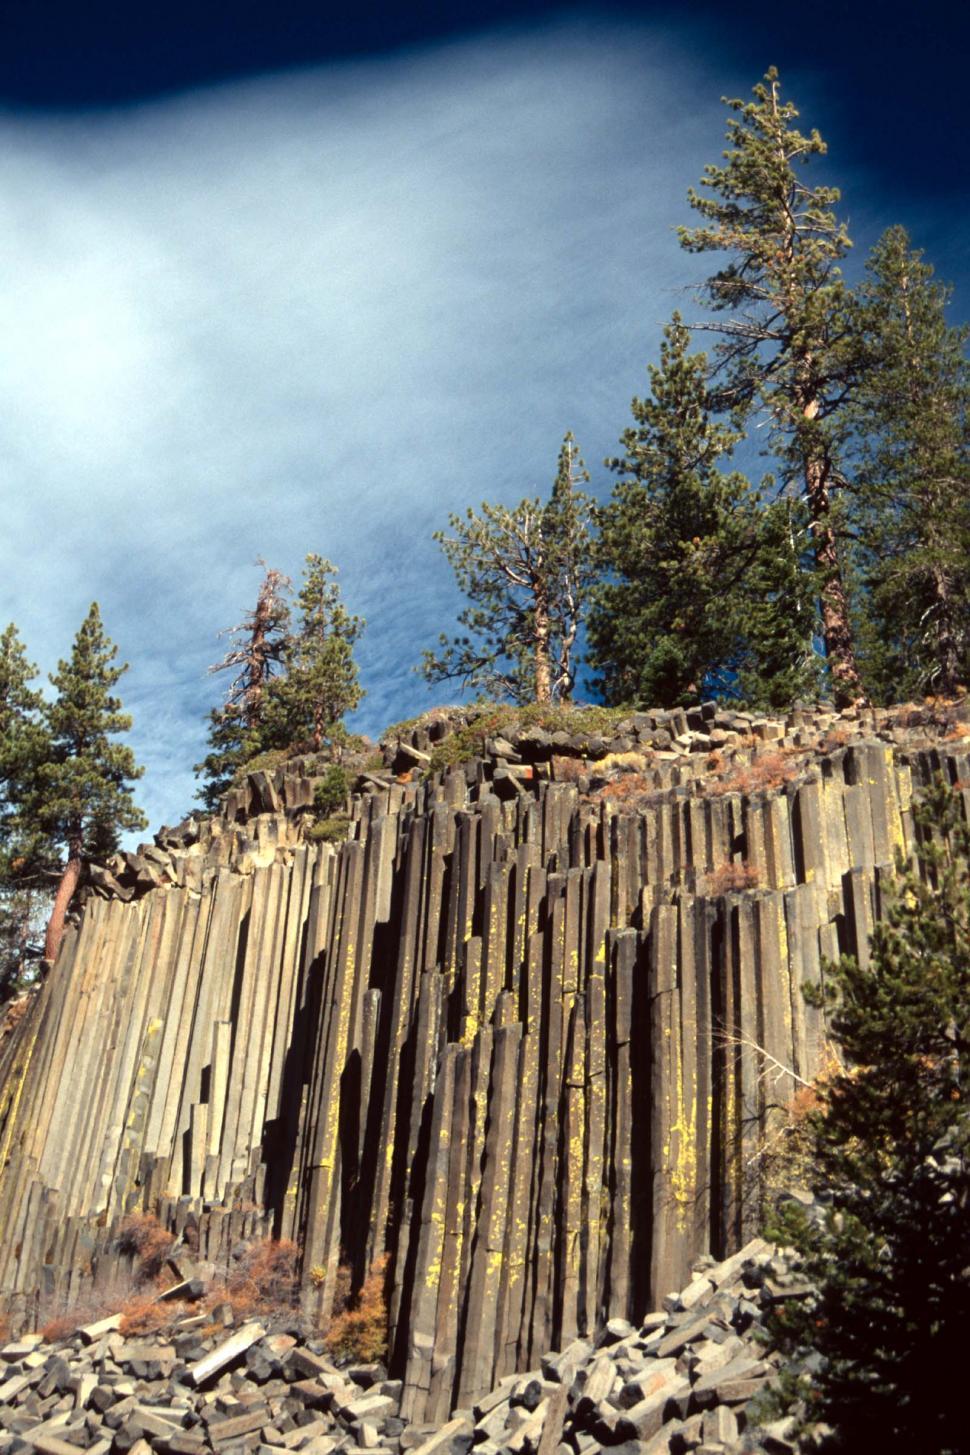 Free Image of Tall Wooden Structure on Mountain Side 